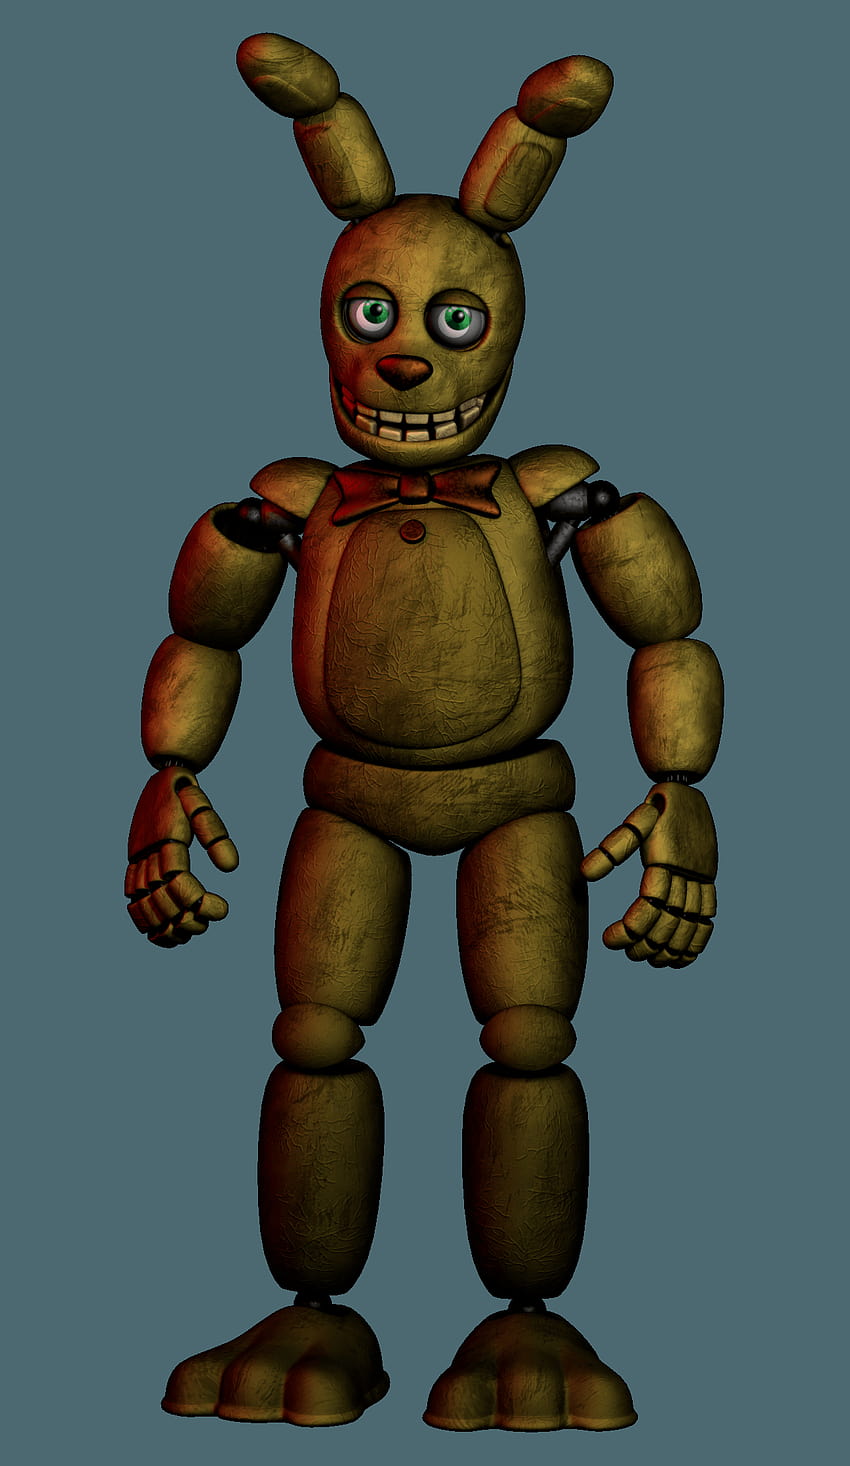 Since his model was found I modded Springbonnie into Help Wanted   rfivenightsatfreddys